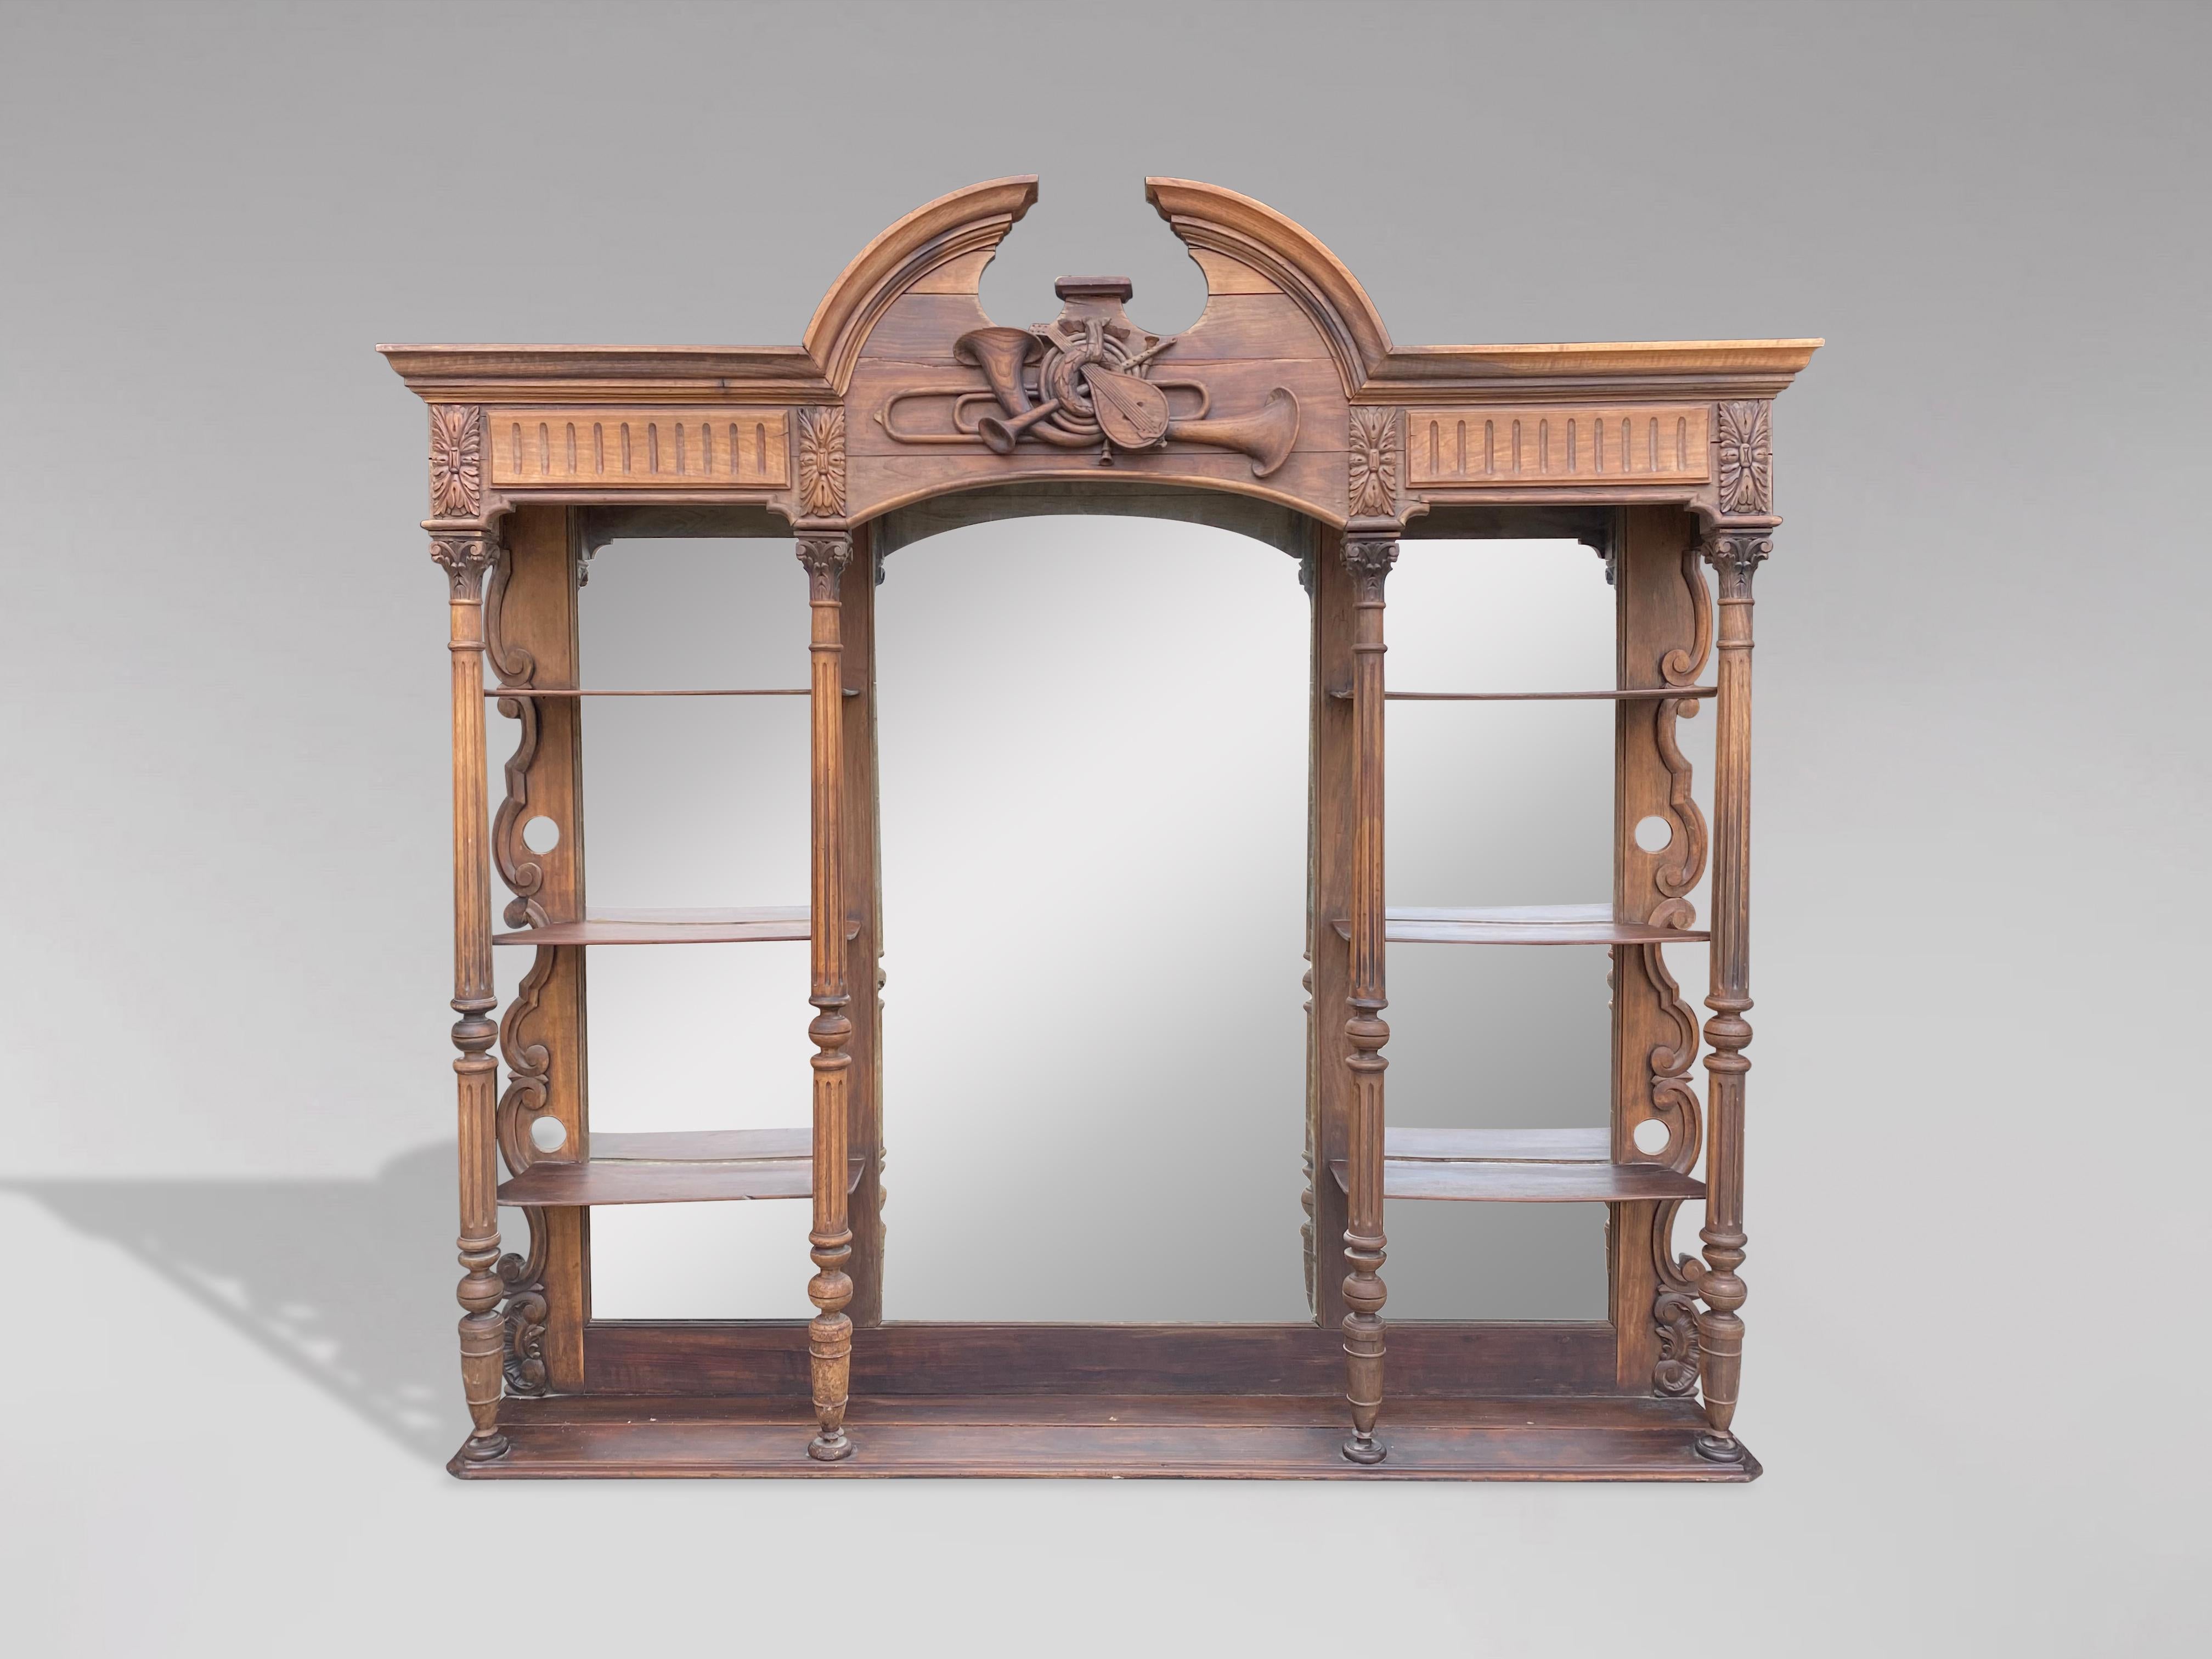 A very decorative large 19th century French carved and ornate walnut back bar shelving unit or étagère with a moulded swan neck pediment above a carved hunting sculpture, three large mirrors, four attractive carved, reeded turned walnut columns